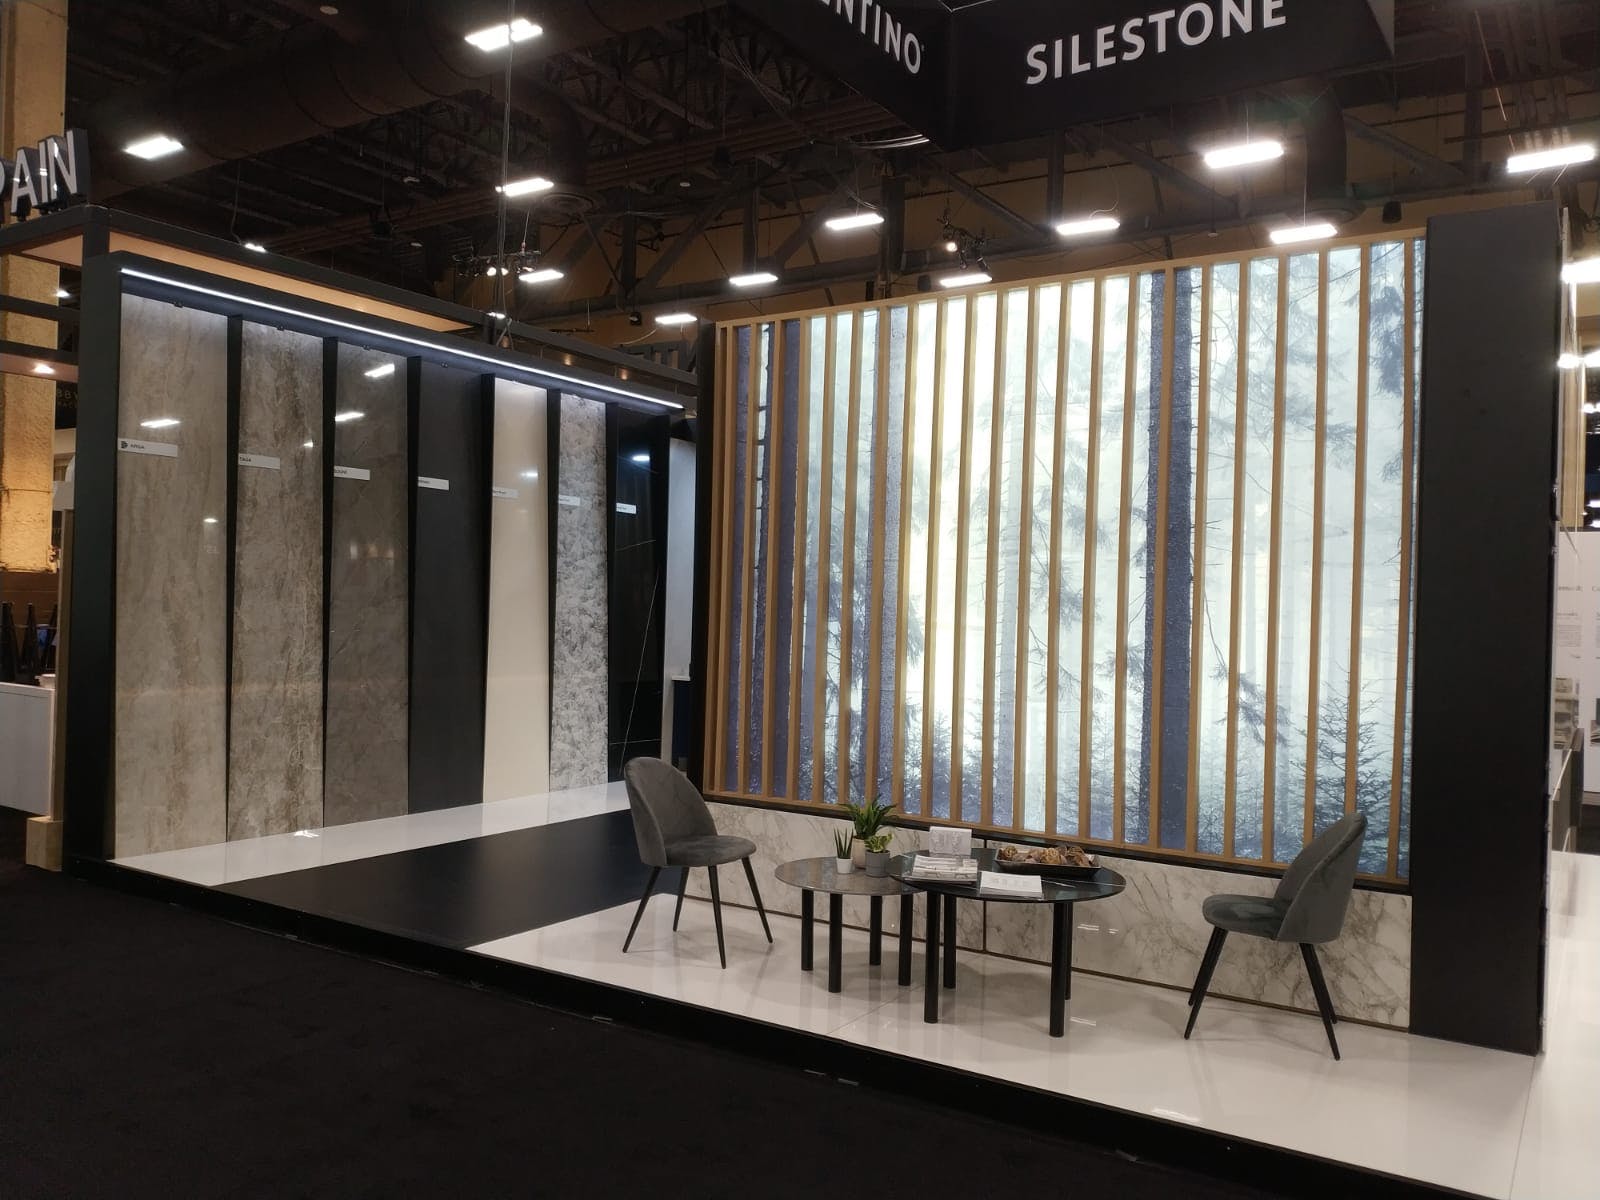 Image of d935b990 8a1b 4685 91a8 cdd1a894ac98 1 in Cosentino Highlights Silestone and Dekton Offerings at HD Expo 2019 - Cosentino